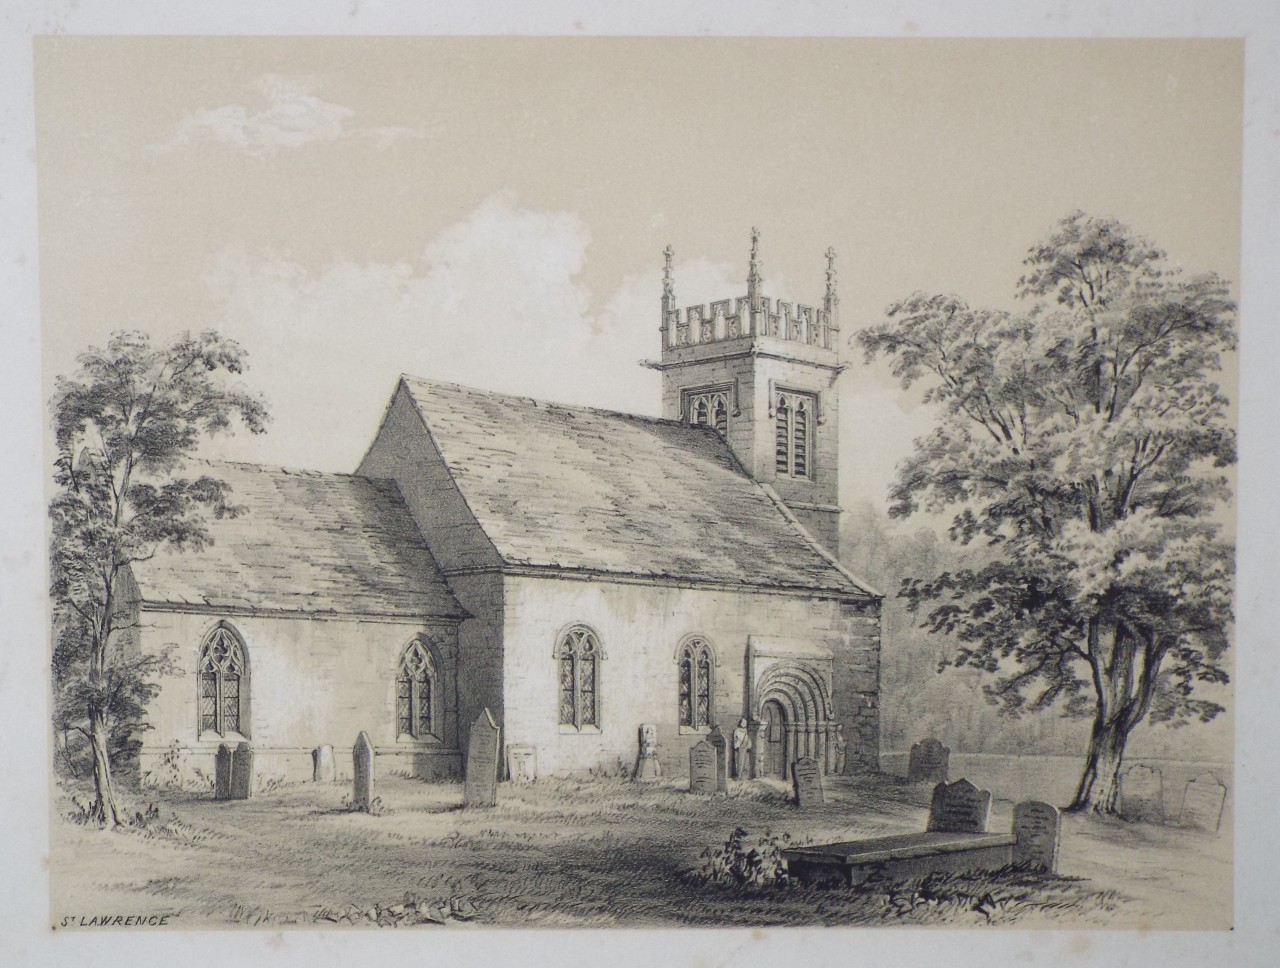 Lithograph - St. Lawrence - Monkhouse